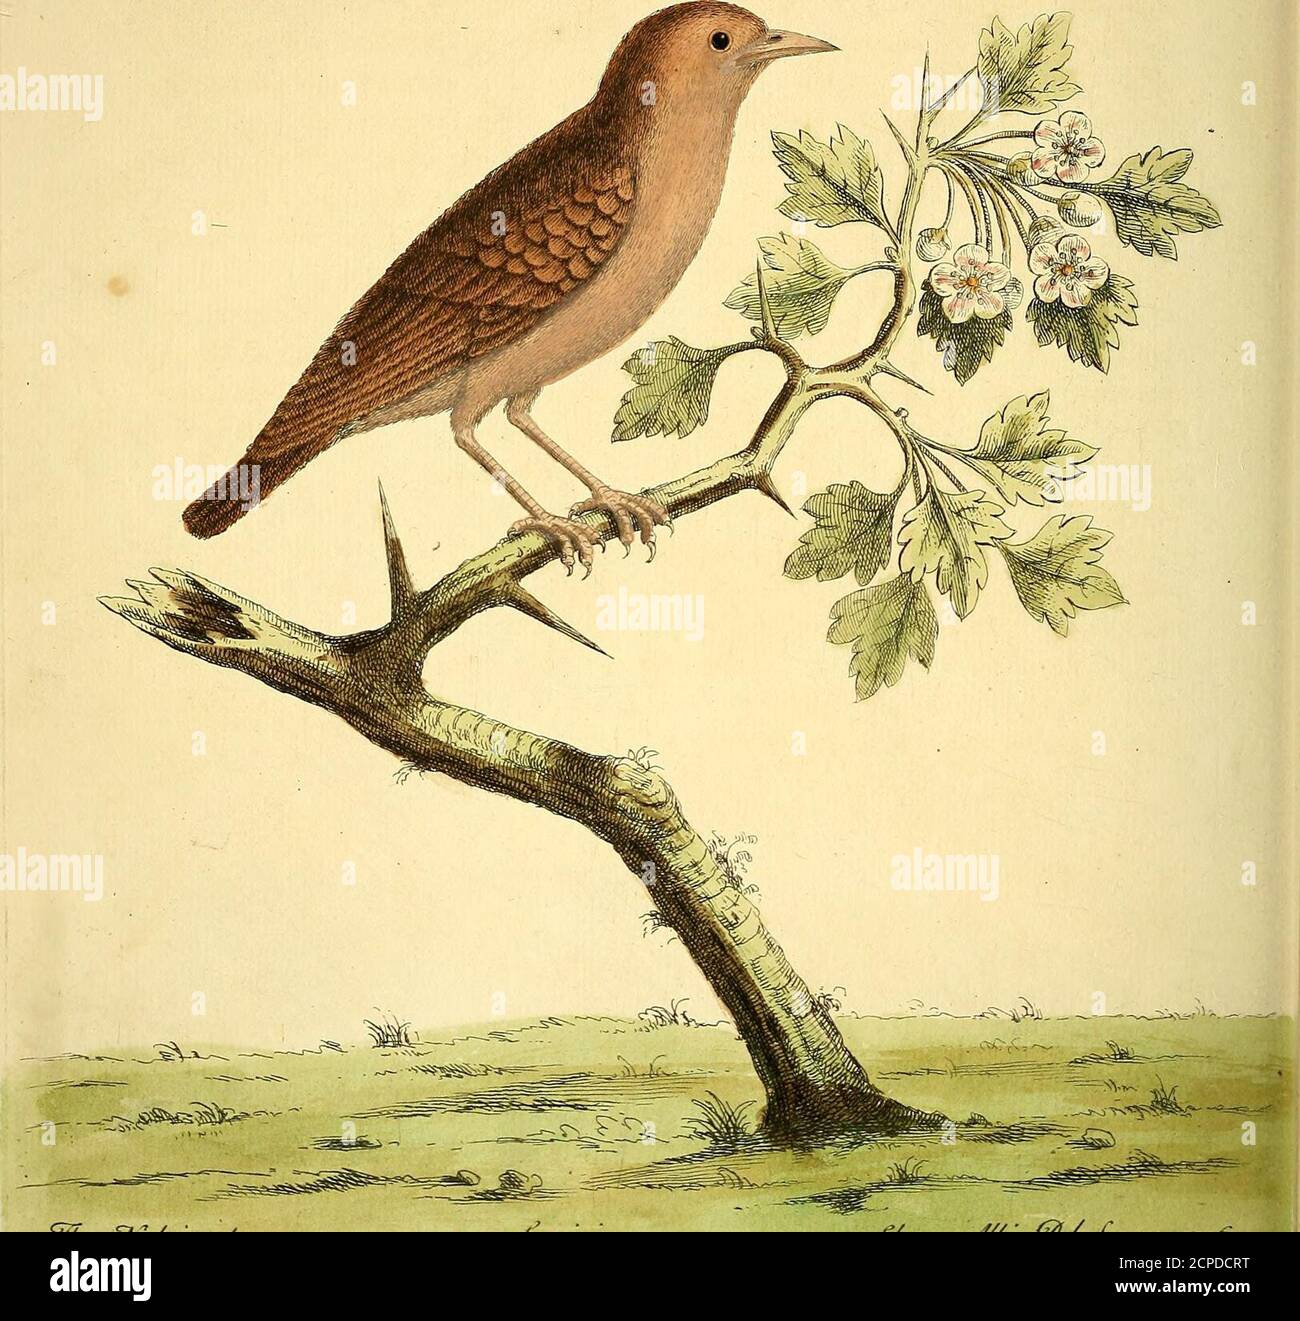 . A natural history of birds : illustrated with a hundred and one copper plates, curiously engraven from the life . .V//^ OWytra^ ^Xa^W^, c^.^y/^^ft ^&/. ryjy. 5^3. ^y/u! &lt;I^i^/ut^u/.a/e,. .=£asci/uii ^/■&a.za^^£^^tmz/^e/.Je/^. se. jys^- ( 49 )The Nightingale, Numb. LIU. NOtwithftandlng the particular Fancy of divers Perfons, for this or that Bird,which they efteem and prefer to all others, the Nightmgale, by the generality ofMankind, is ftill accounted the chief of all fingiwg Birds; he fends forth his plea-fant Notes with fo lavifli a Freedom, that he makes even the Woods to eccho withhis Stock Photo